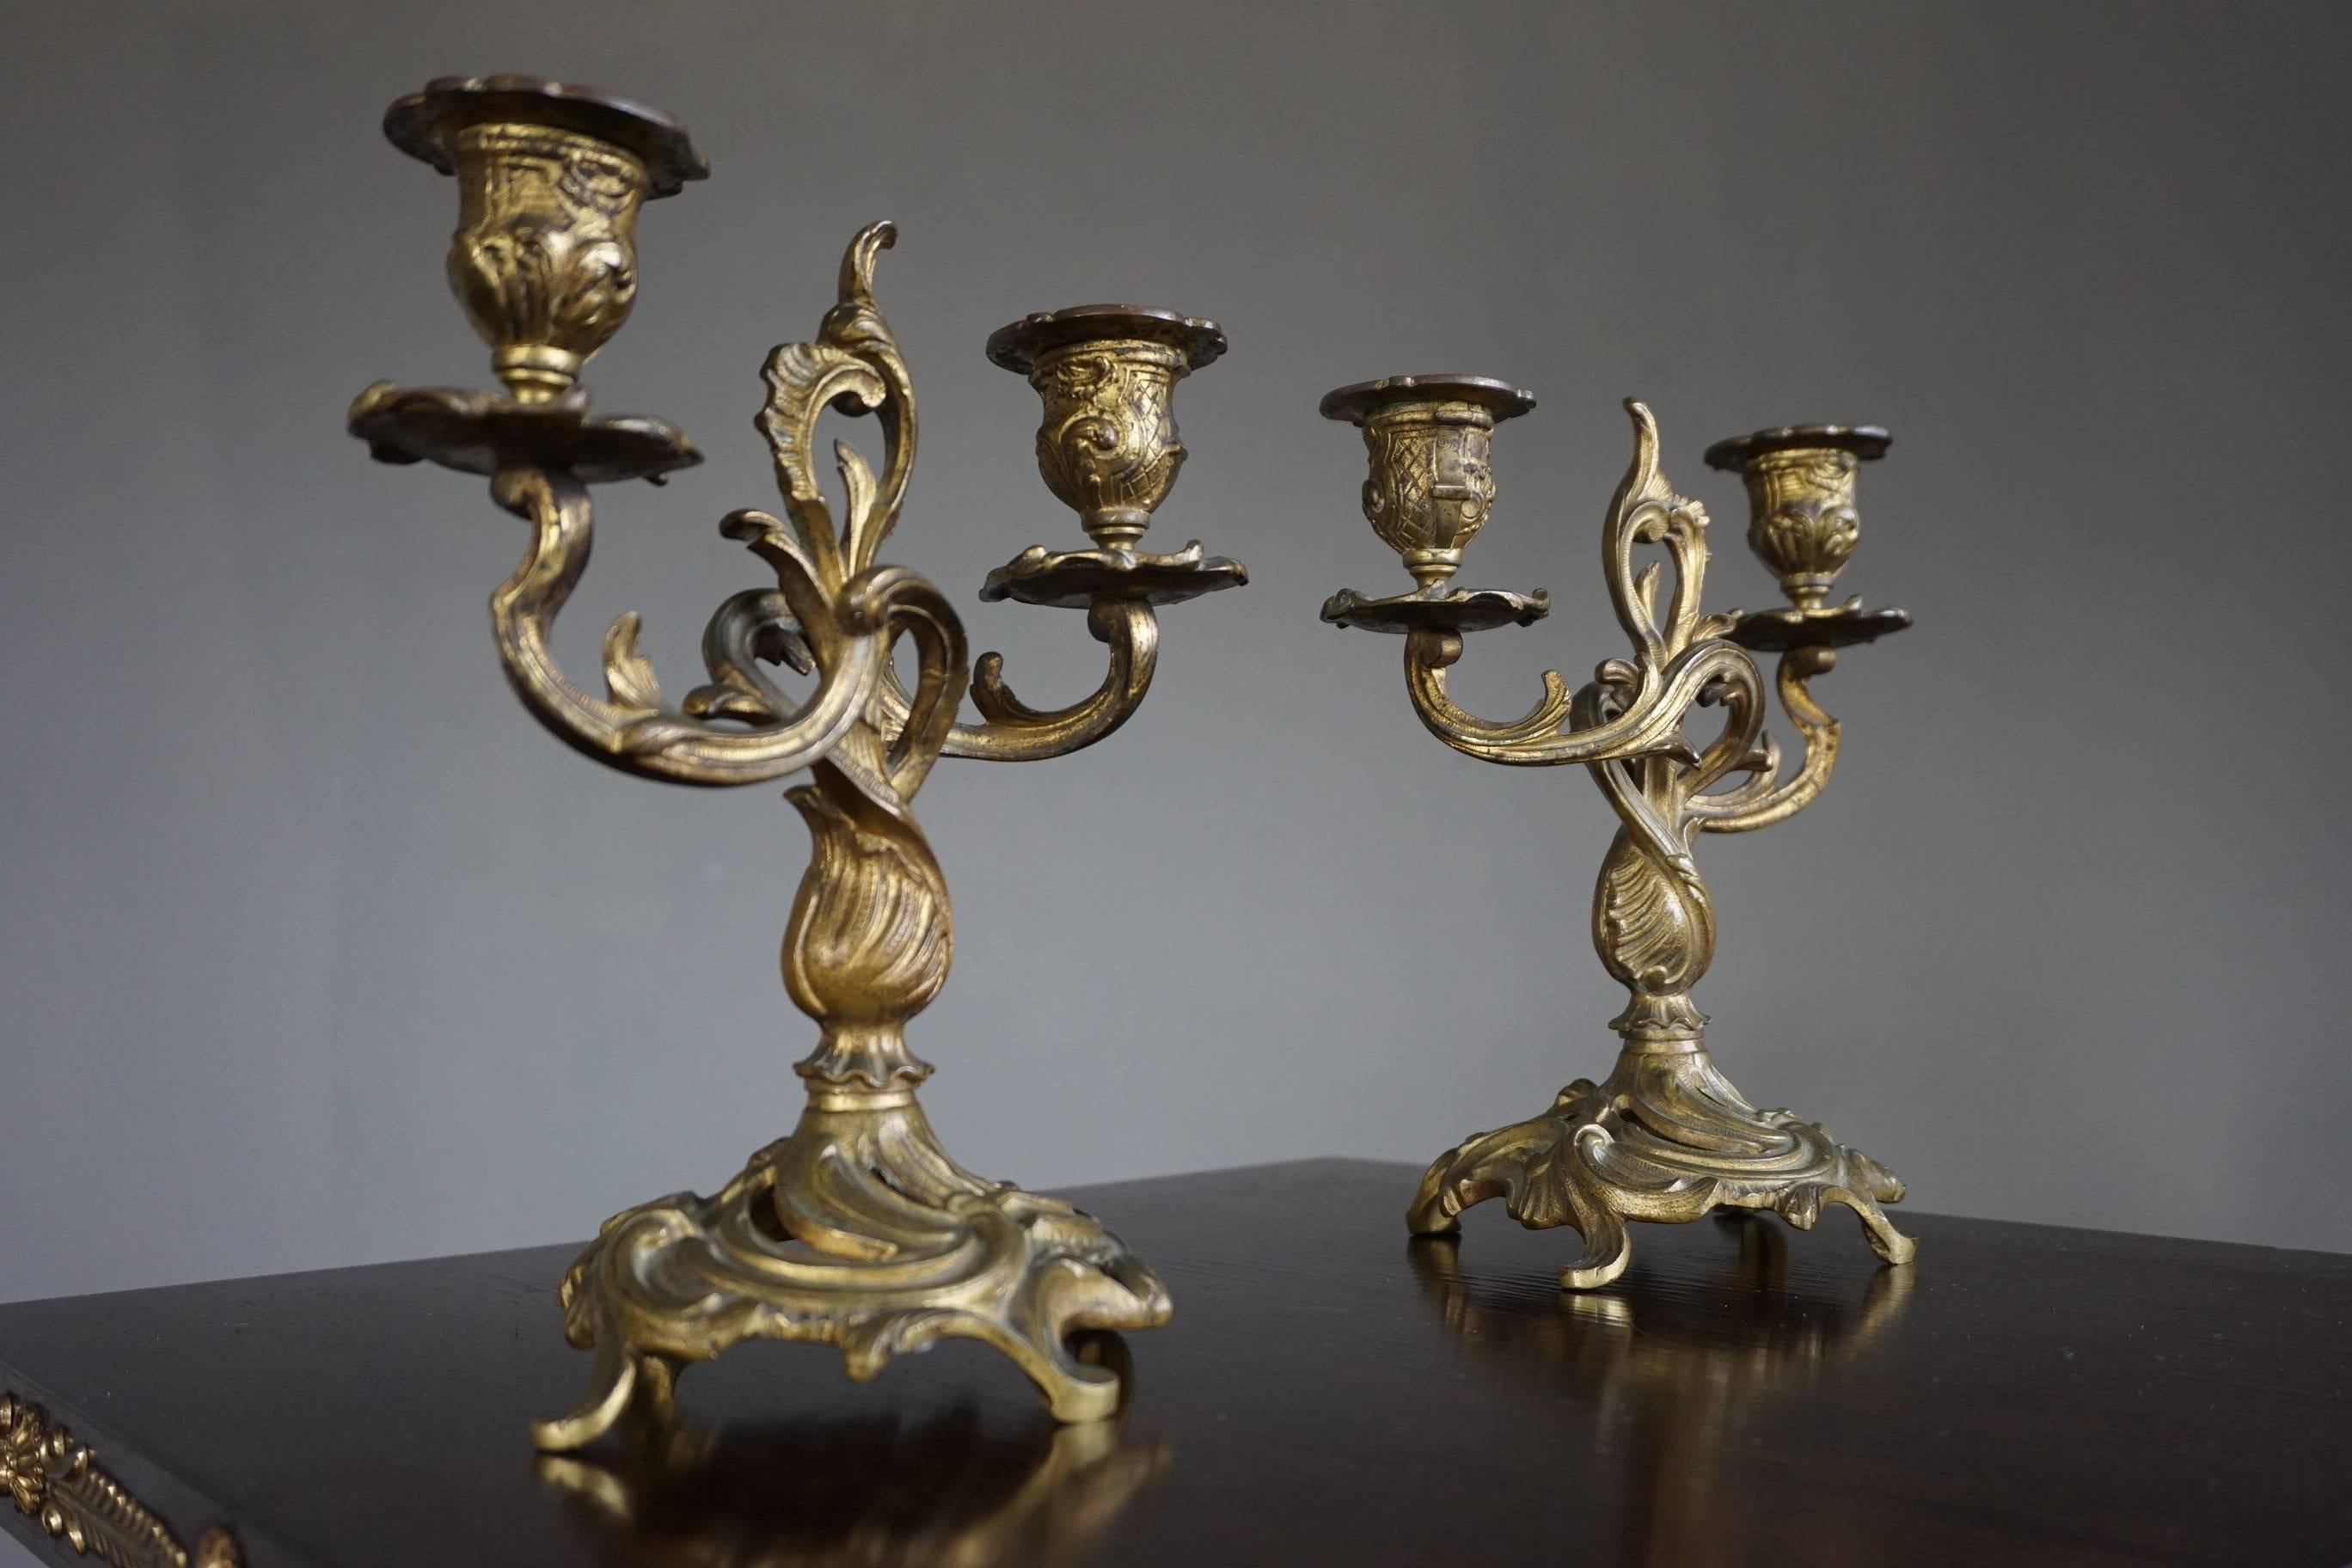 Very elegant and stylish candelabras with their original bobeches.

This graceful pair of antique bronze candelabras will look marvelous in the middle of a small table, on a dresser or side table or anywhere else for that matter. Over the many